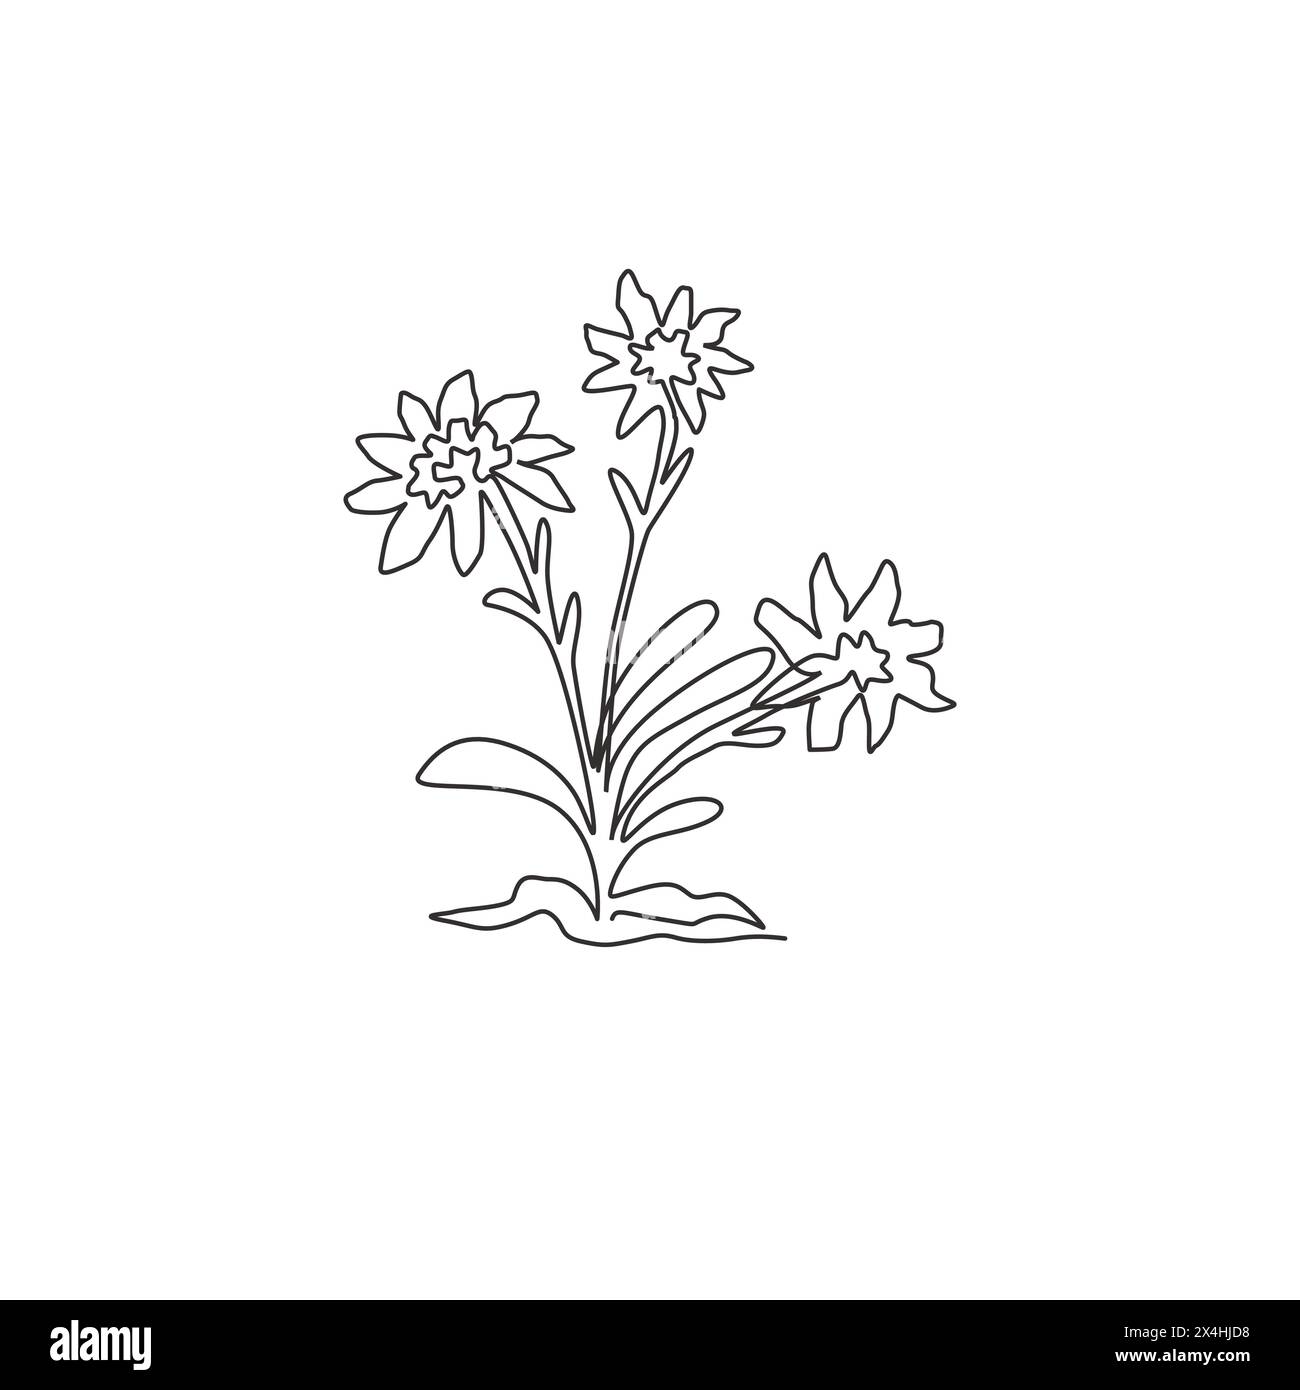 Single continuous line drawing beauty and exotic mountain edelweiss flower. Decorative leontopodium plant for home wall decor art poster print. Modern Stock Vector